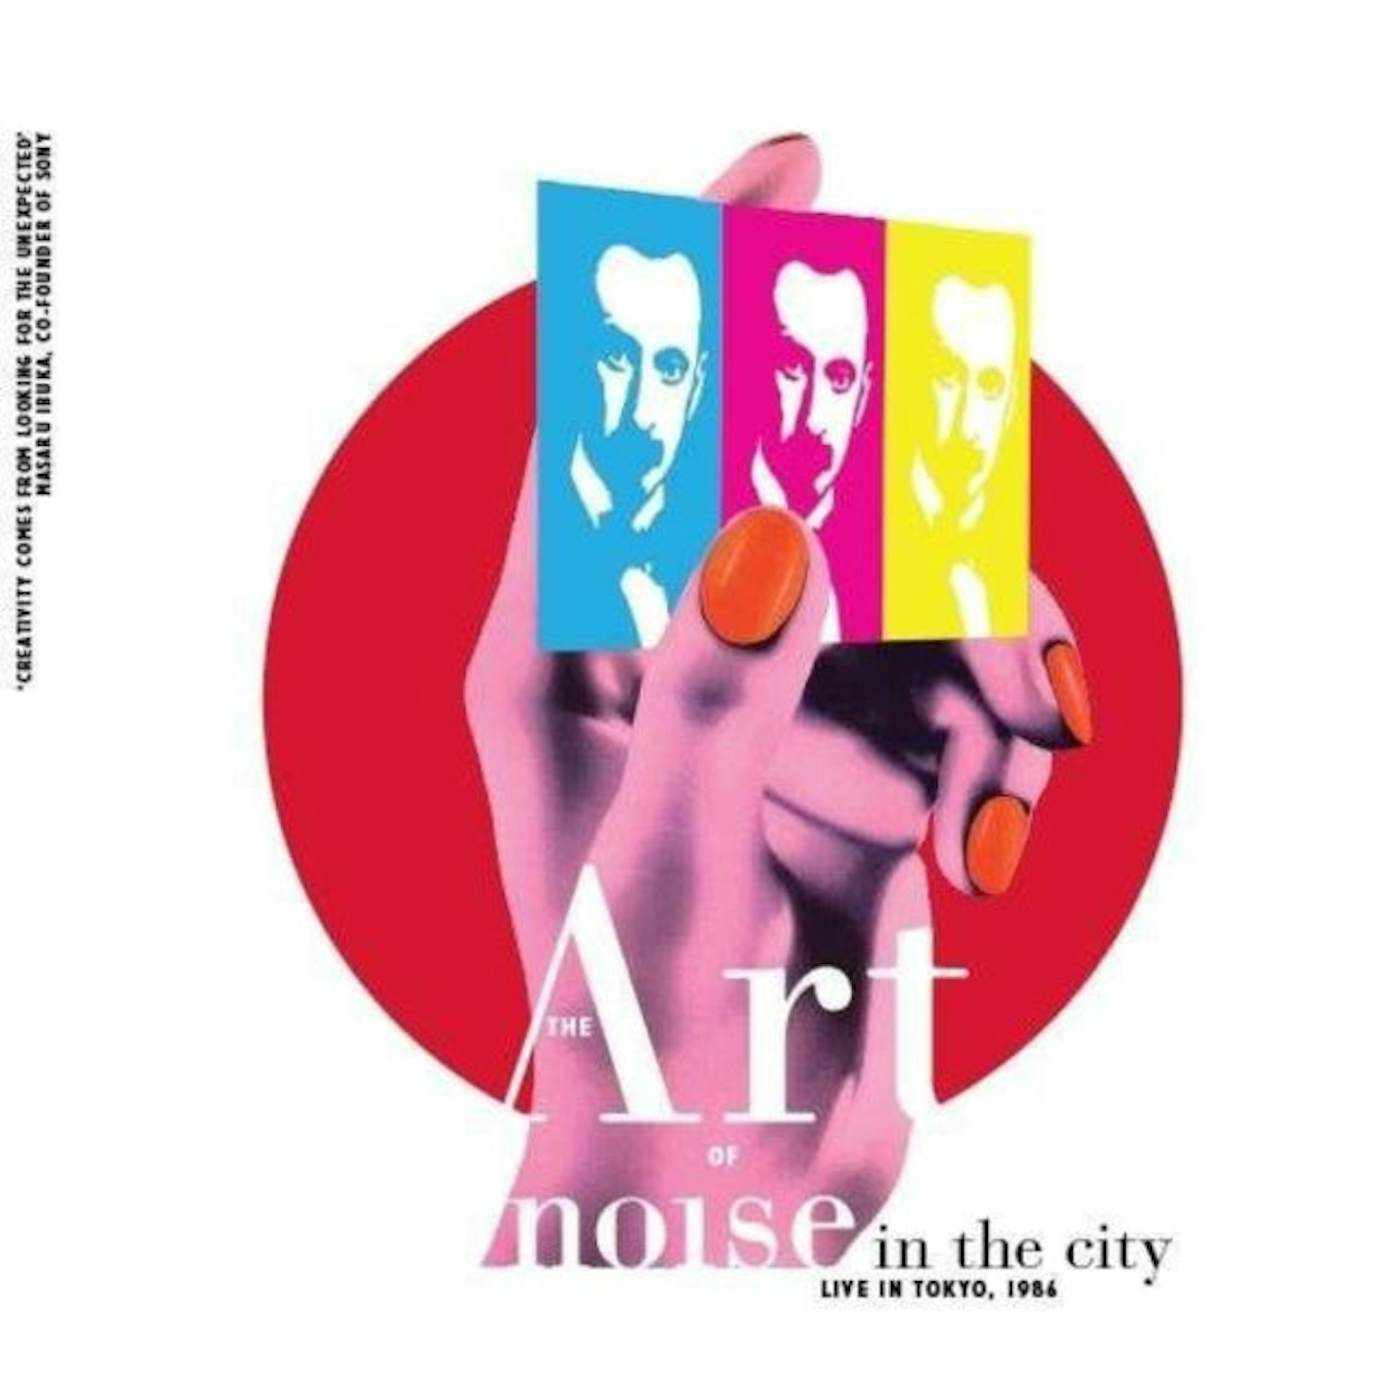 The Art Of Noise CD - Noise In The City (Live In Tokyo)